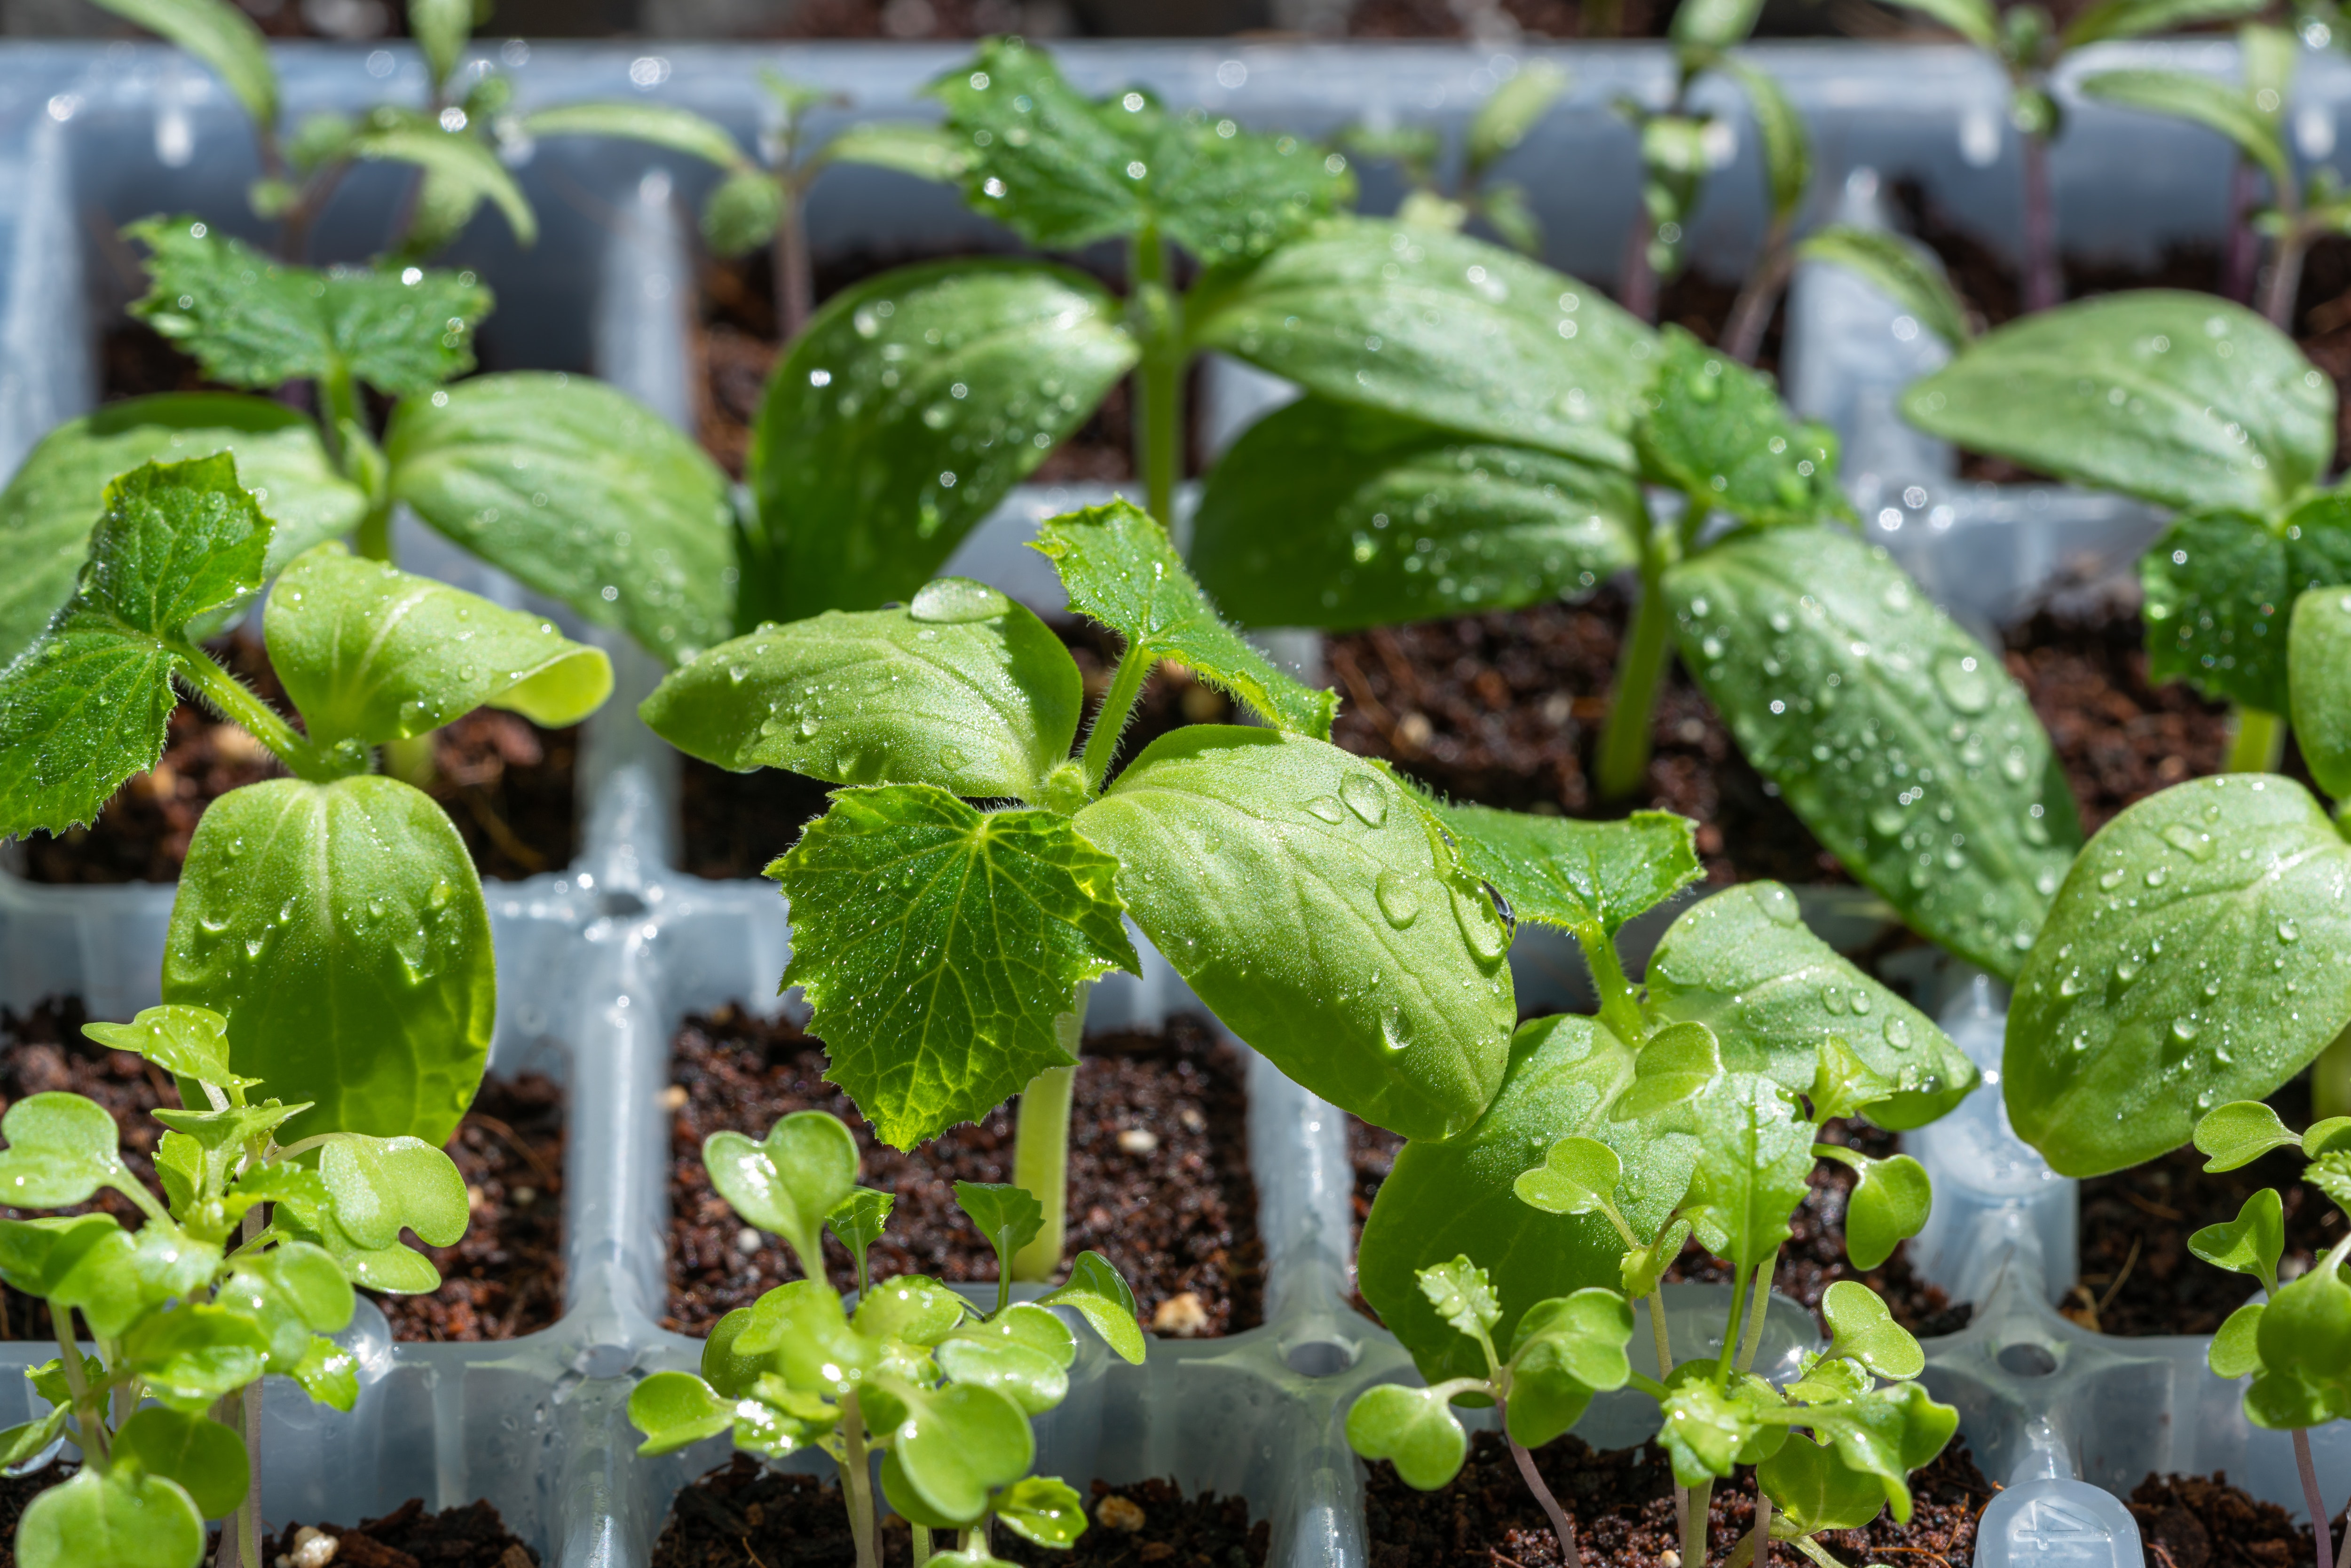 Young seedlings in a tray with water on the leaves